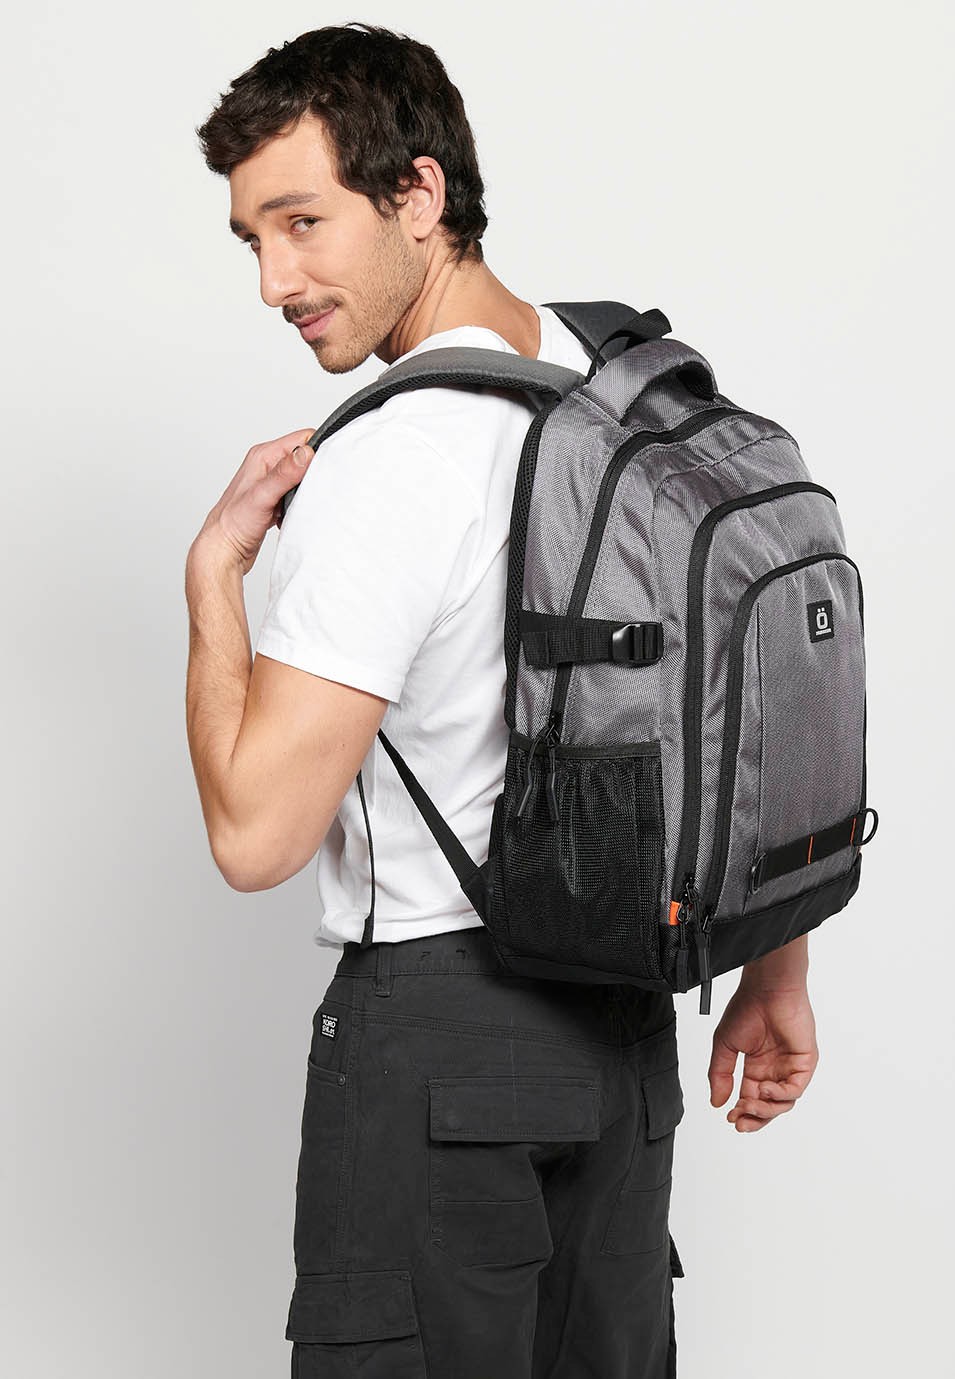 Koröshi backpack with three zippered compartments, one for laptop, with Gray interior pockets 9